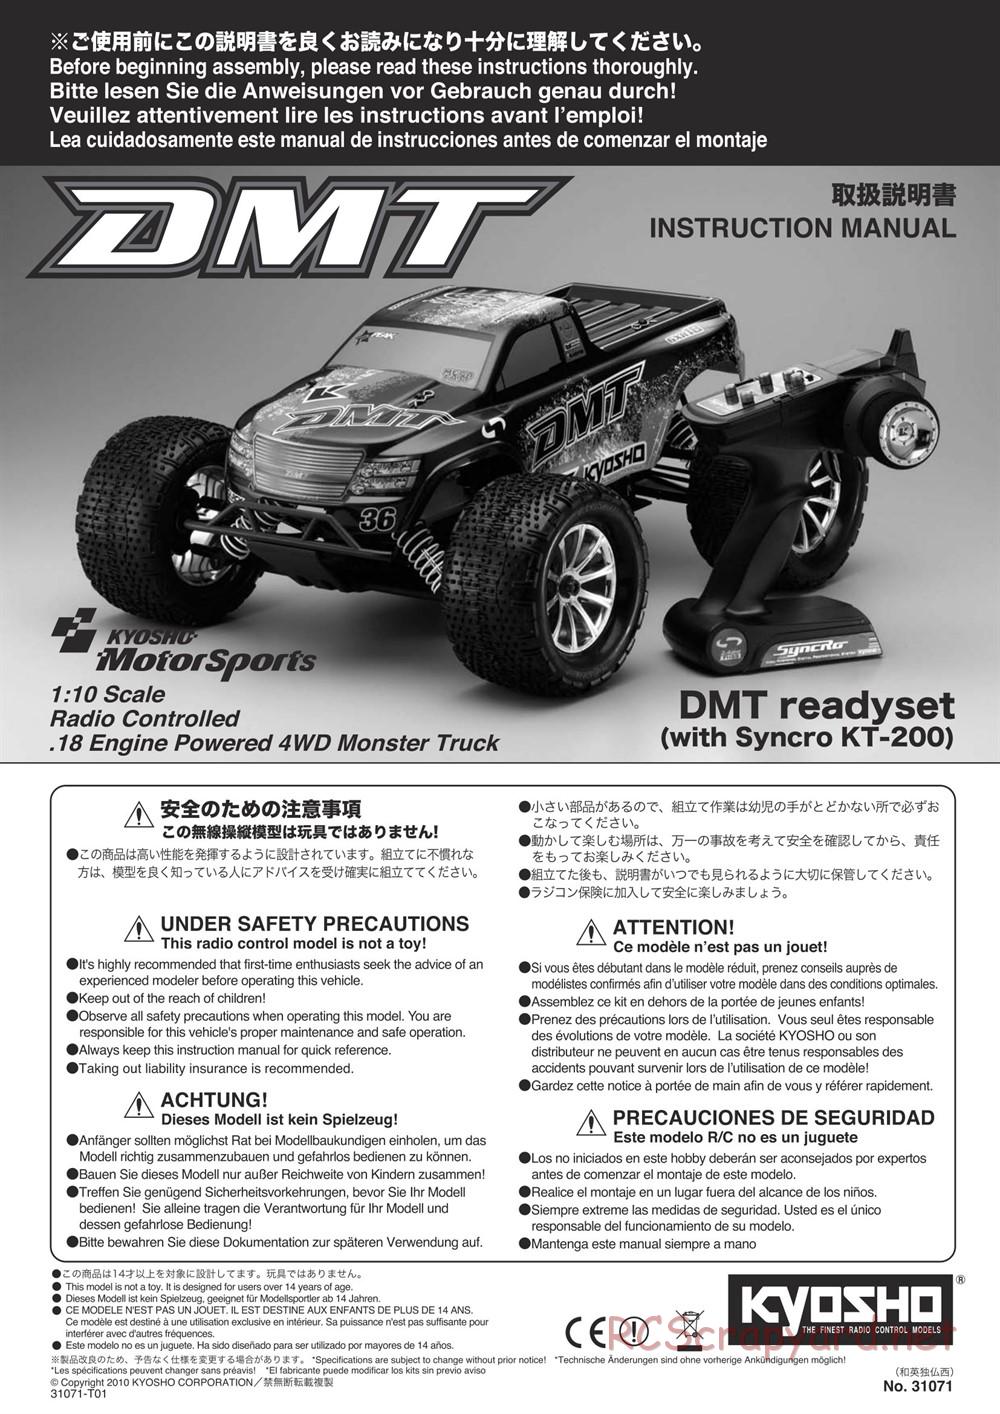 Kyosho - DMT - Manual - Page 1